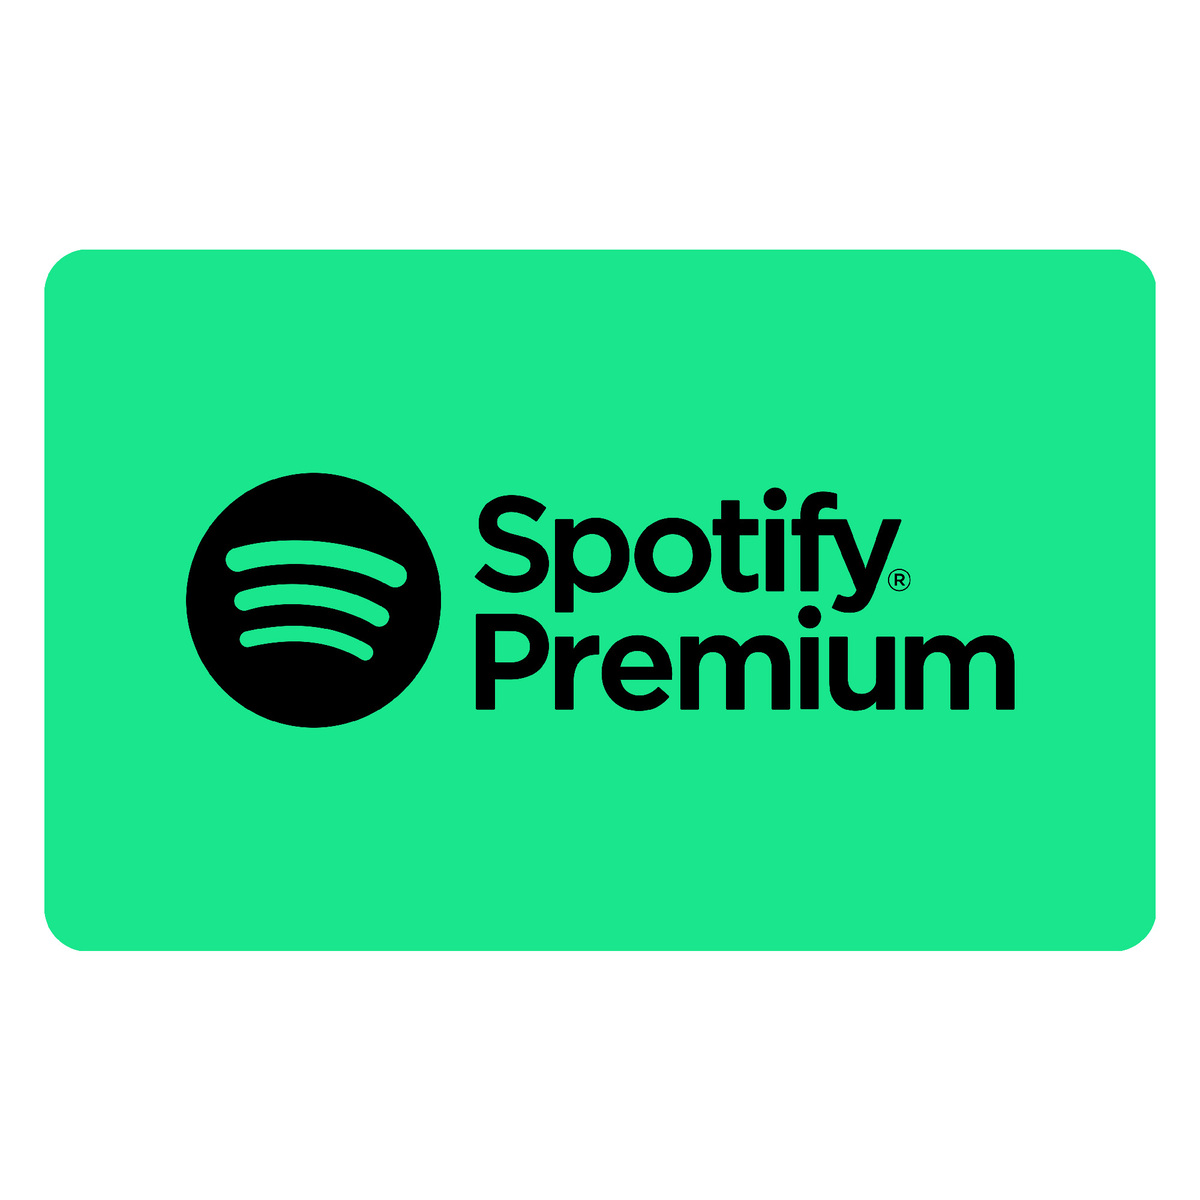 Spotify Premium Digital Gift Card, 12 Months Subscription